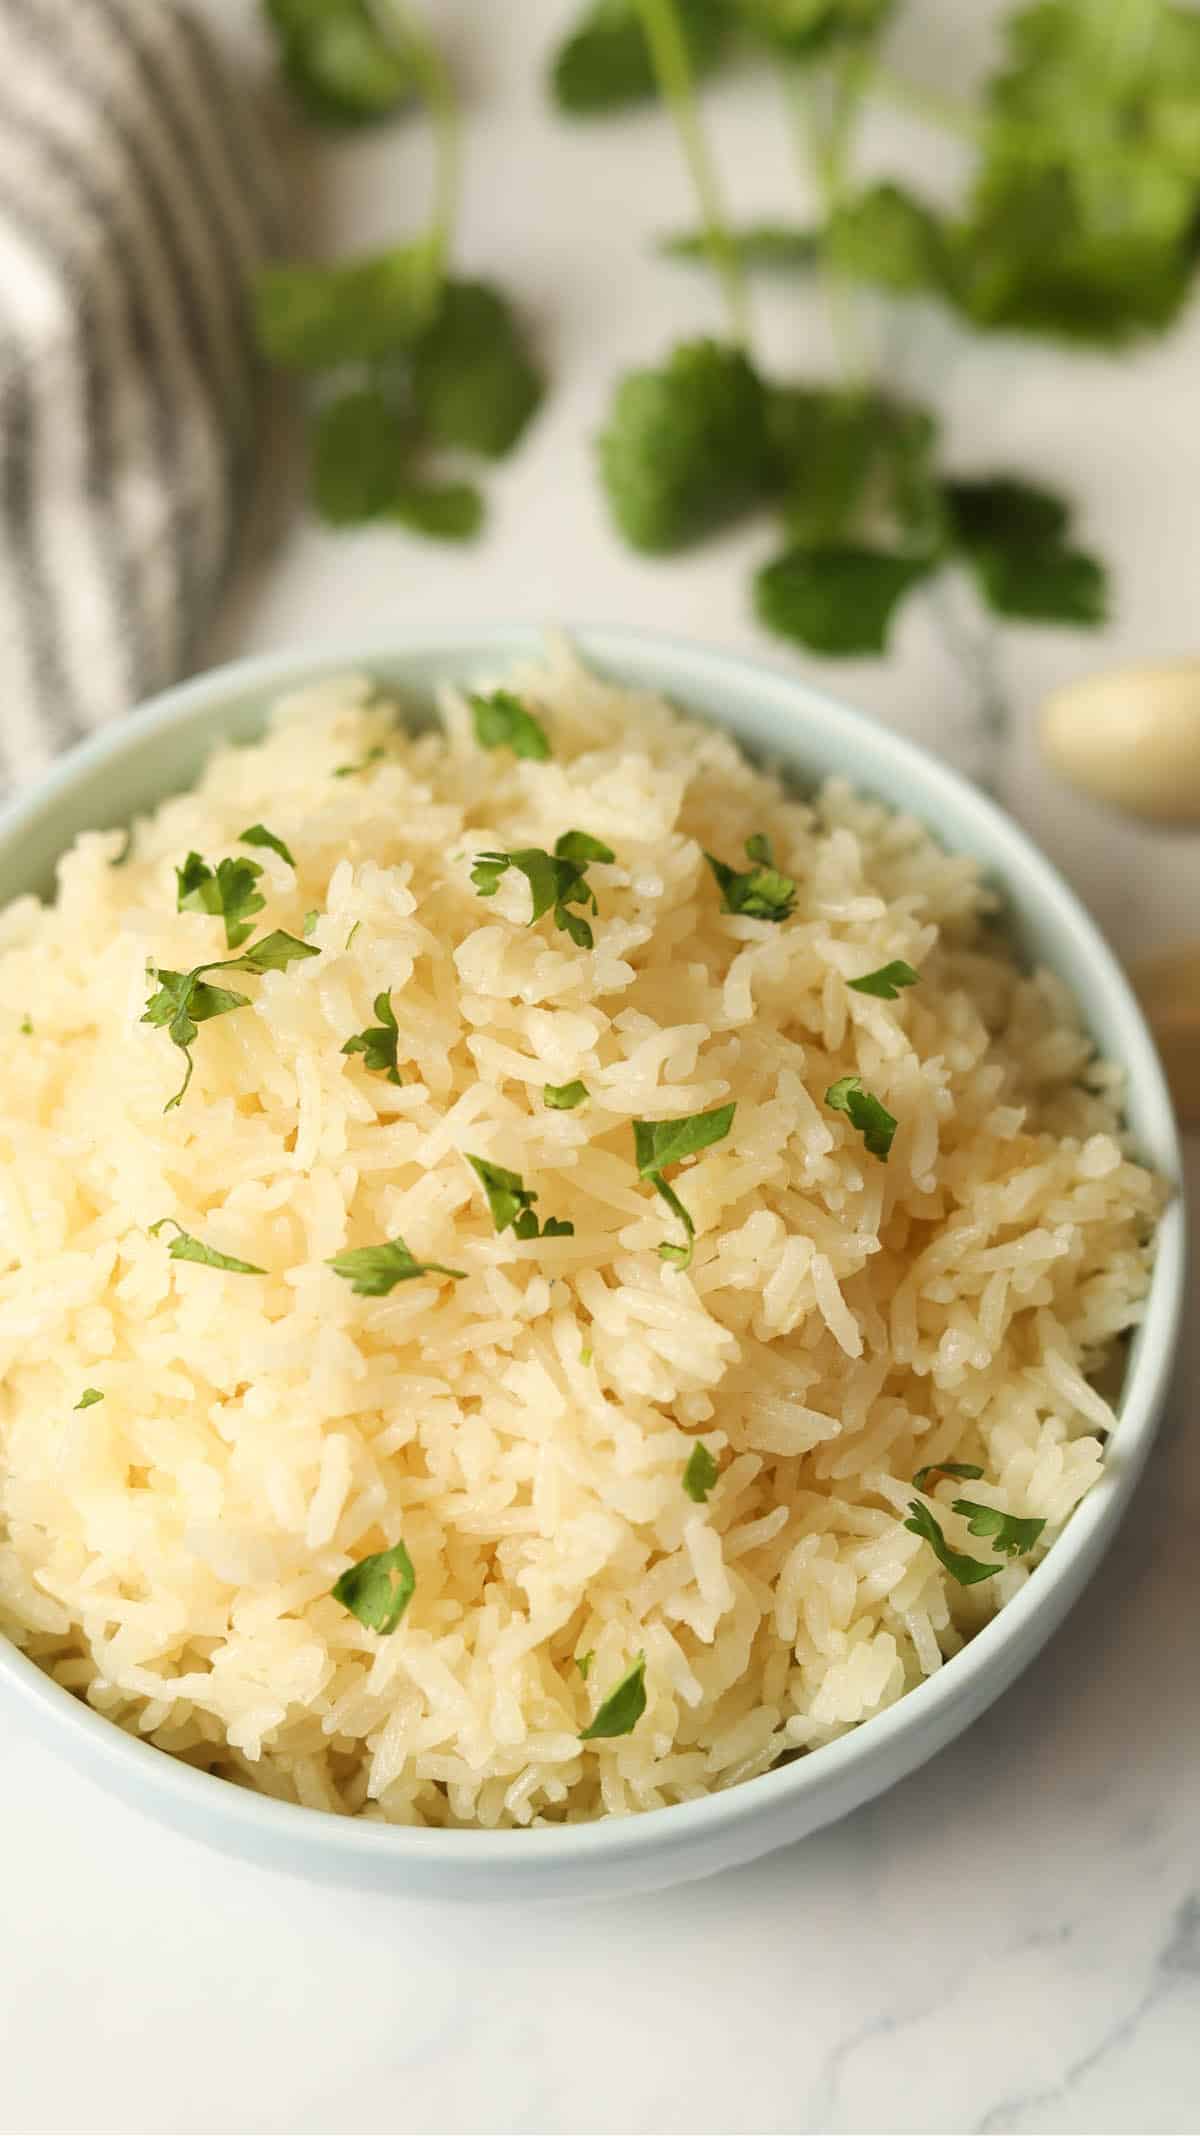 Cooked white rice in bowl with cilantro garnish.